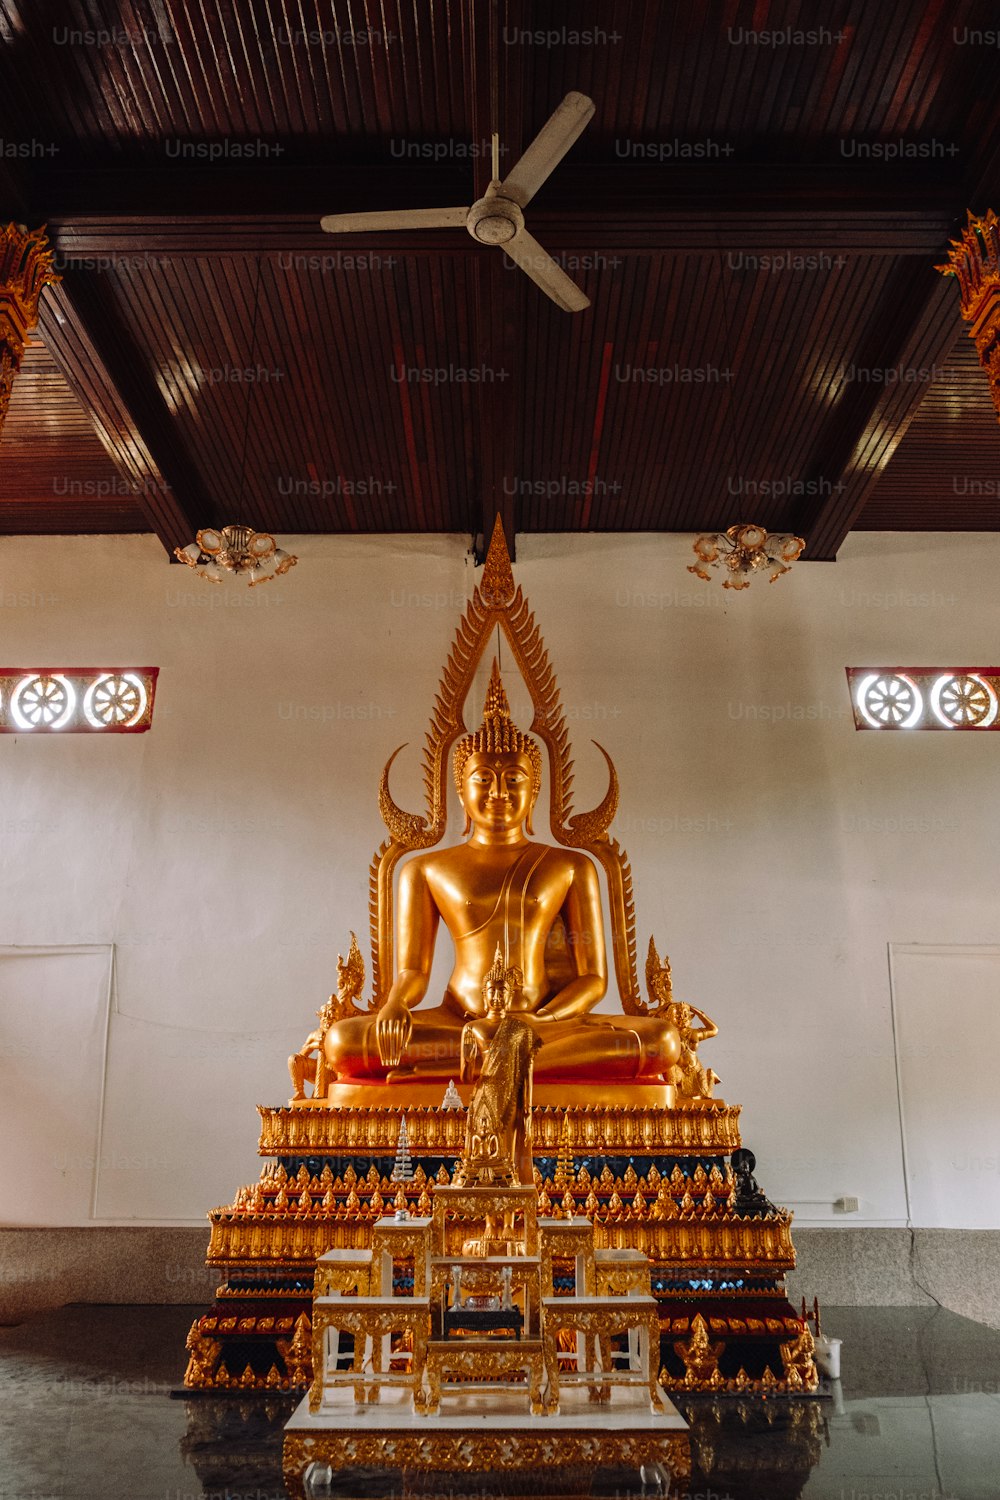 a large golden buddha statue sitting in a room